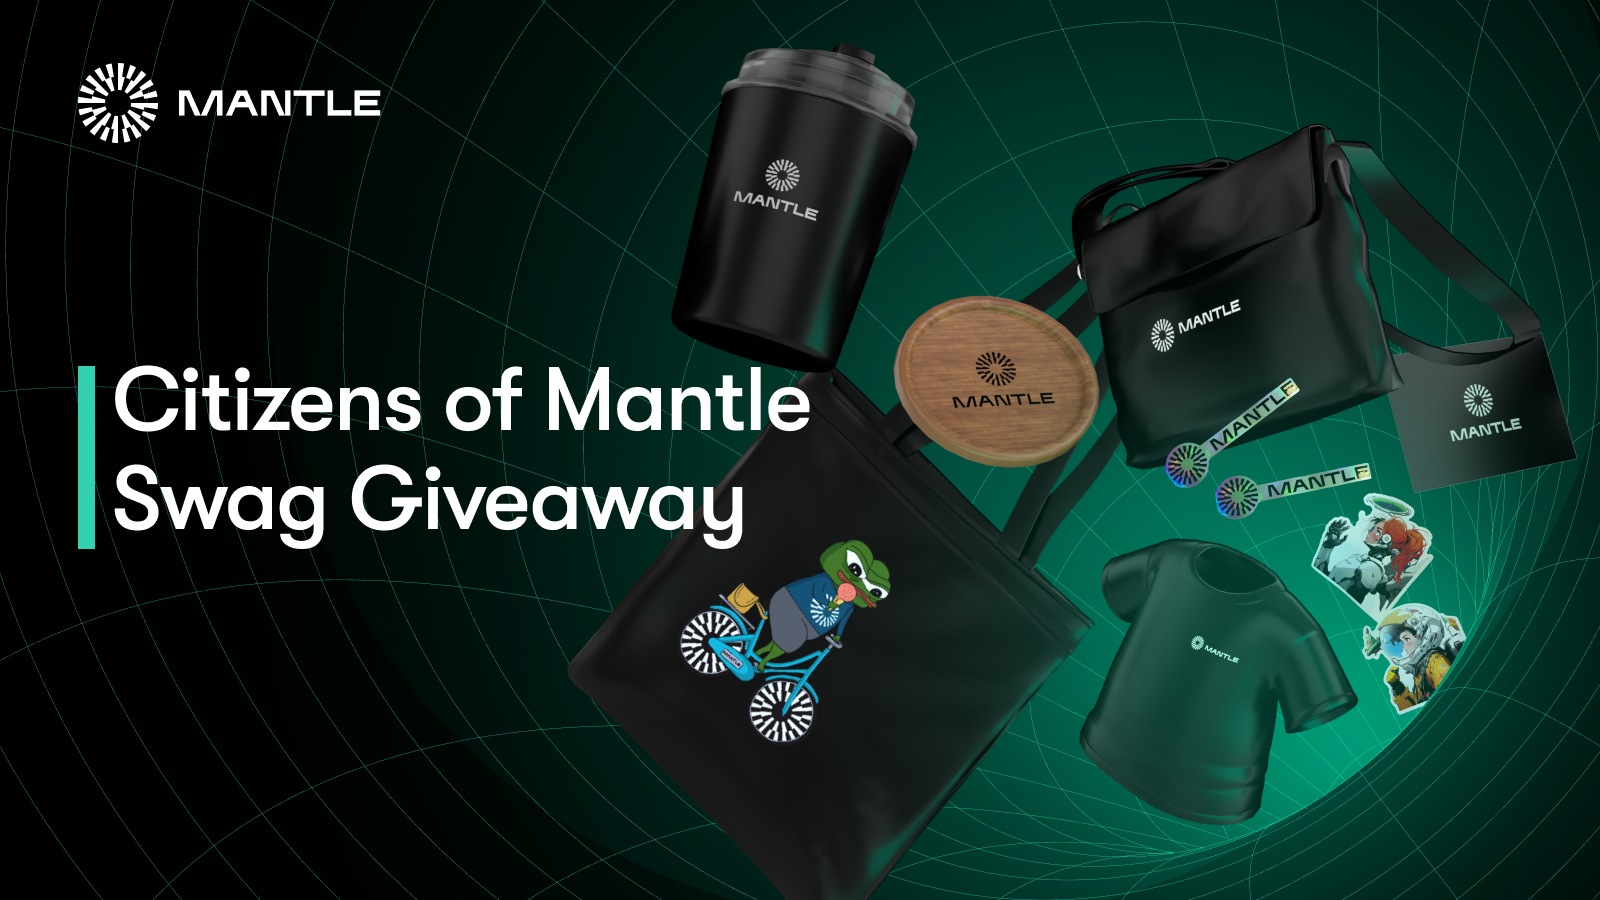 Citizens of Mantle Swag Giveaway